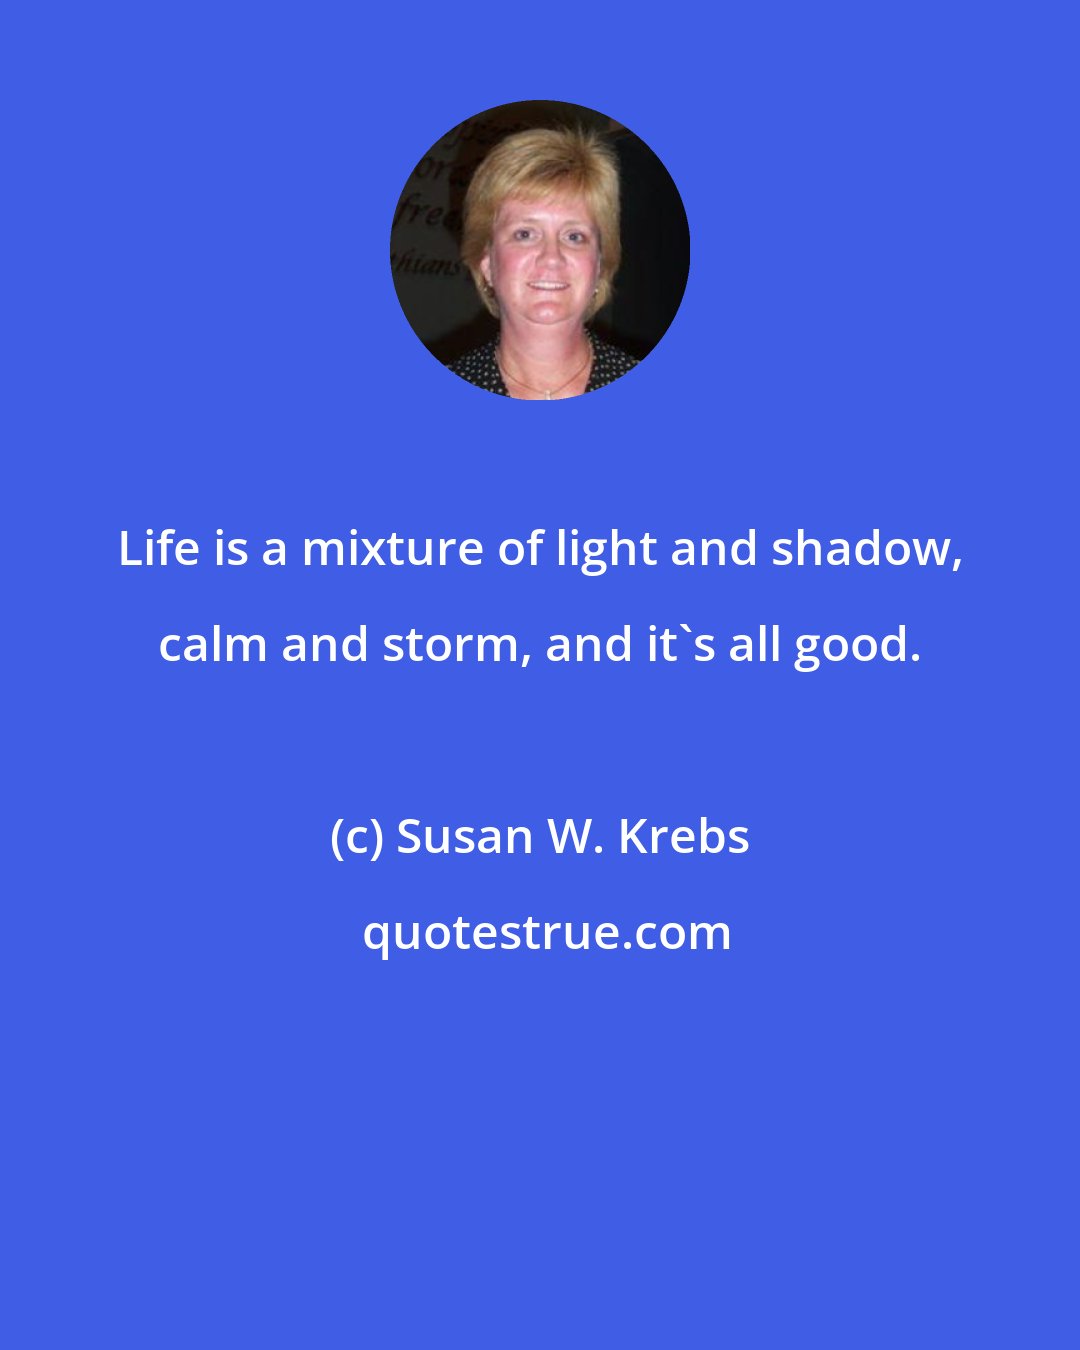 Susan W. Krebs: Life is a mixture of light and shadow, calm and storm, and it's all good.